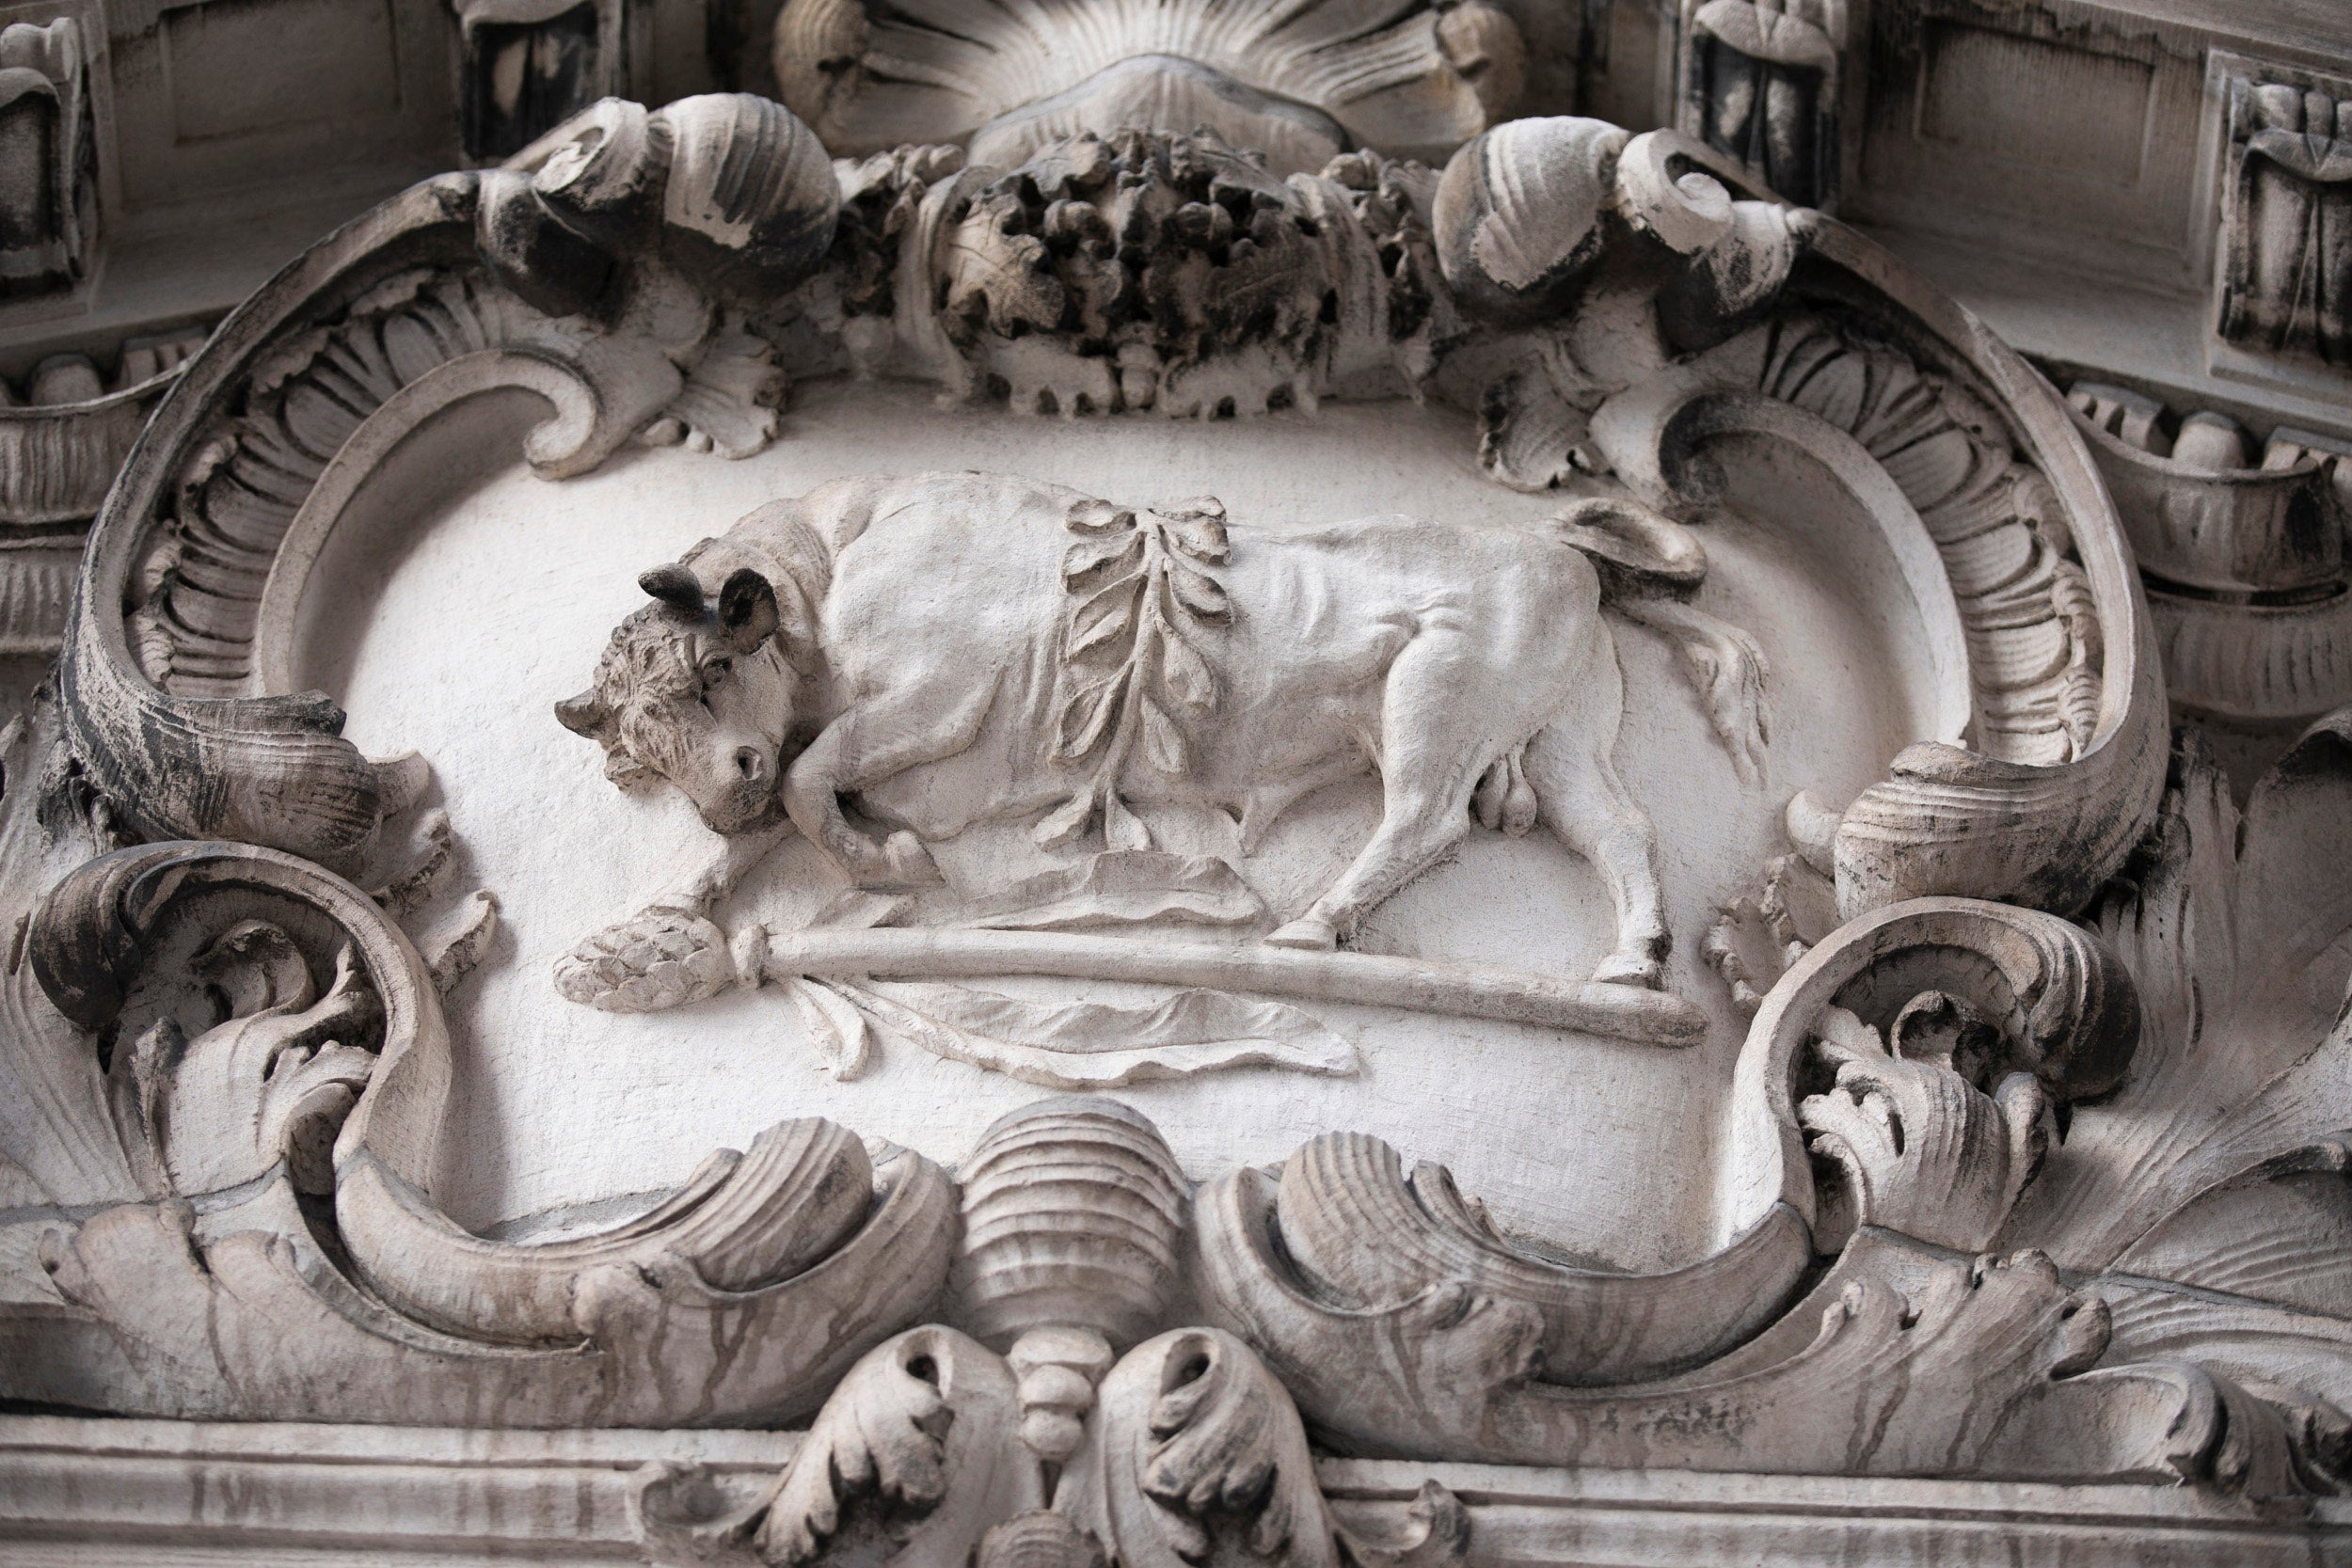 A bull is carved in marble.